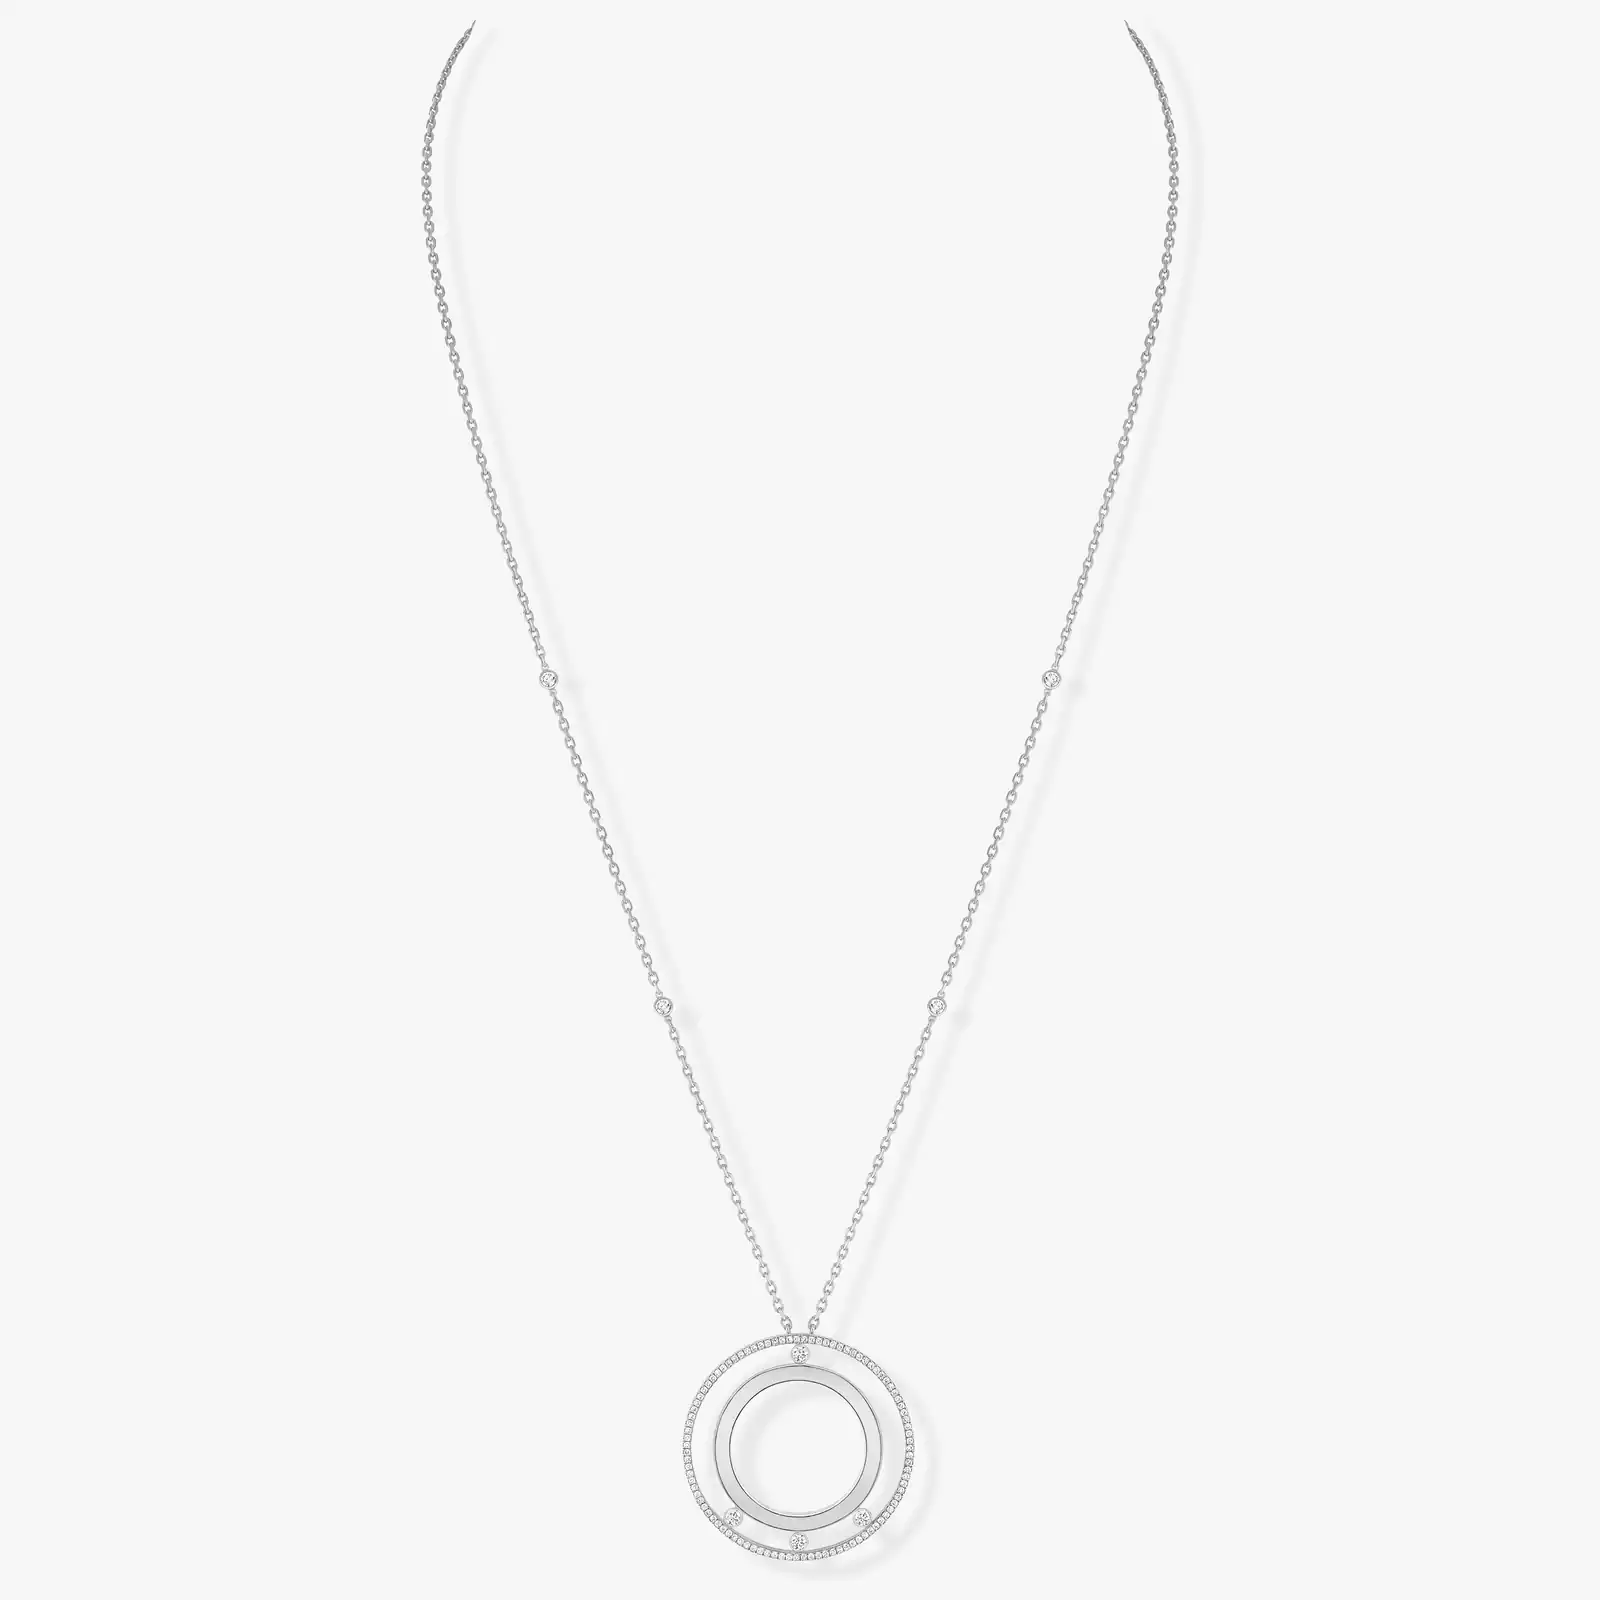 Move Romane Long Necklace White Gold For Her Diamond Necklace 11169-WG